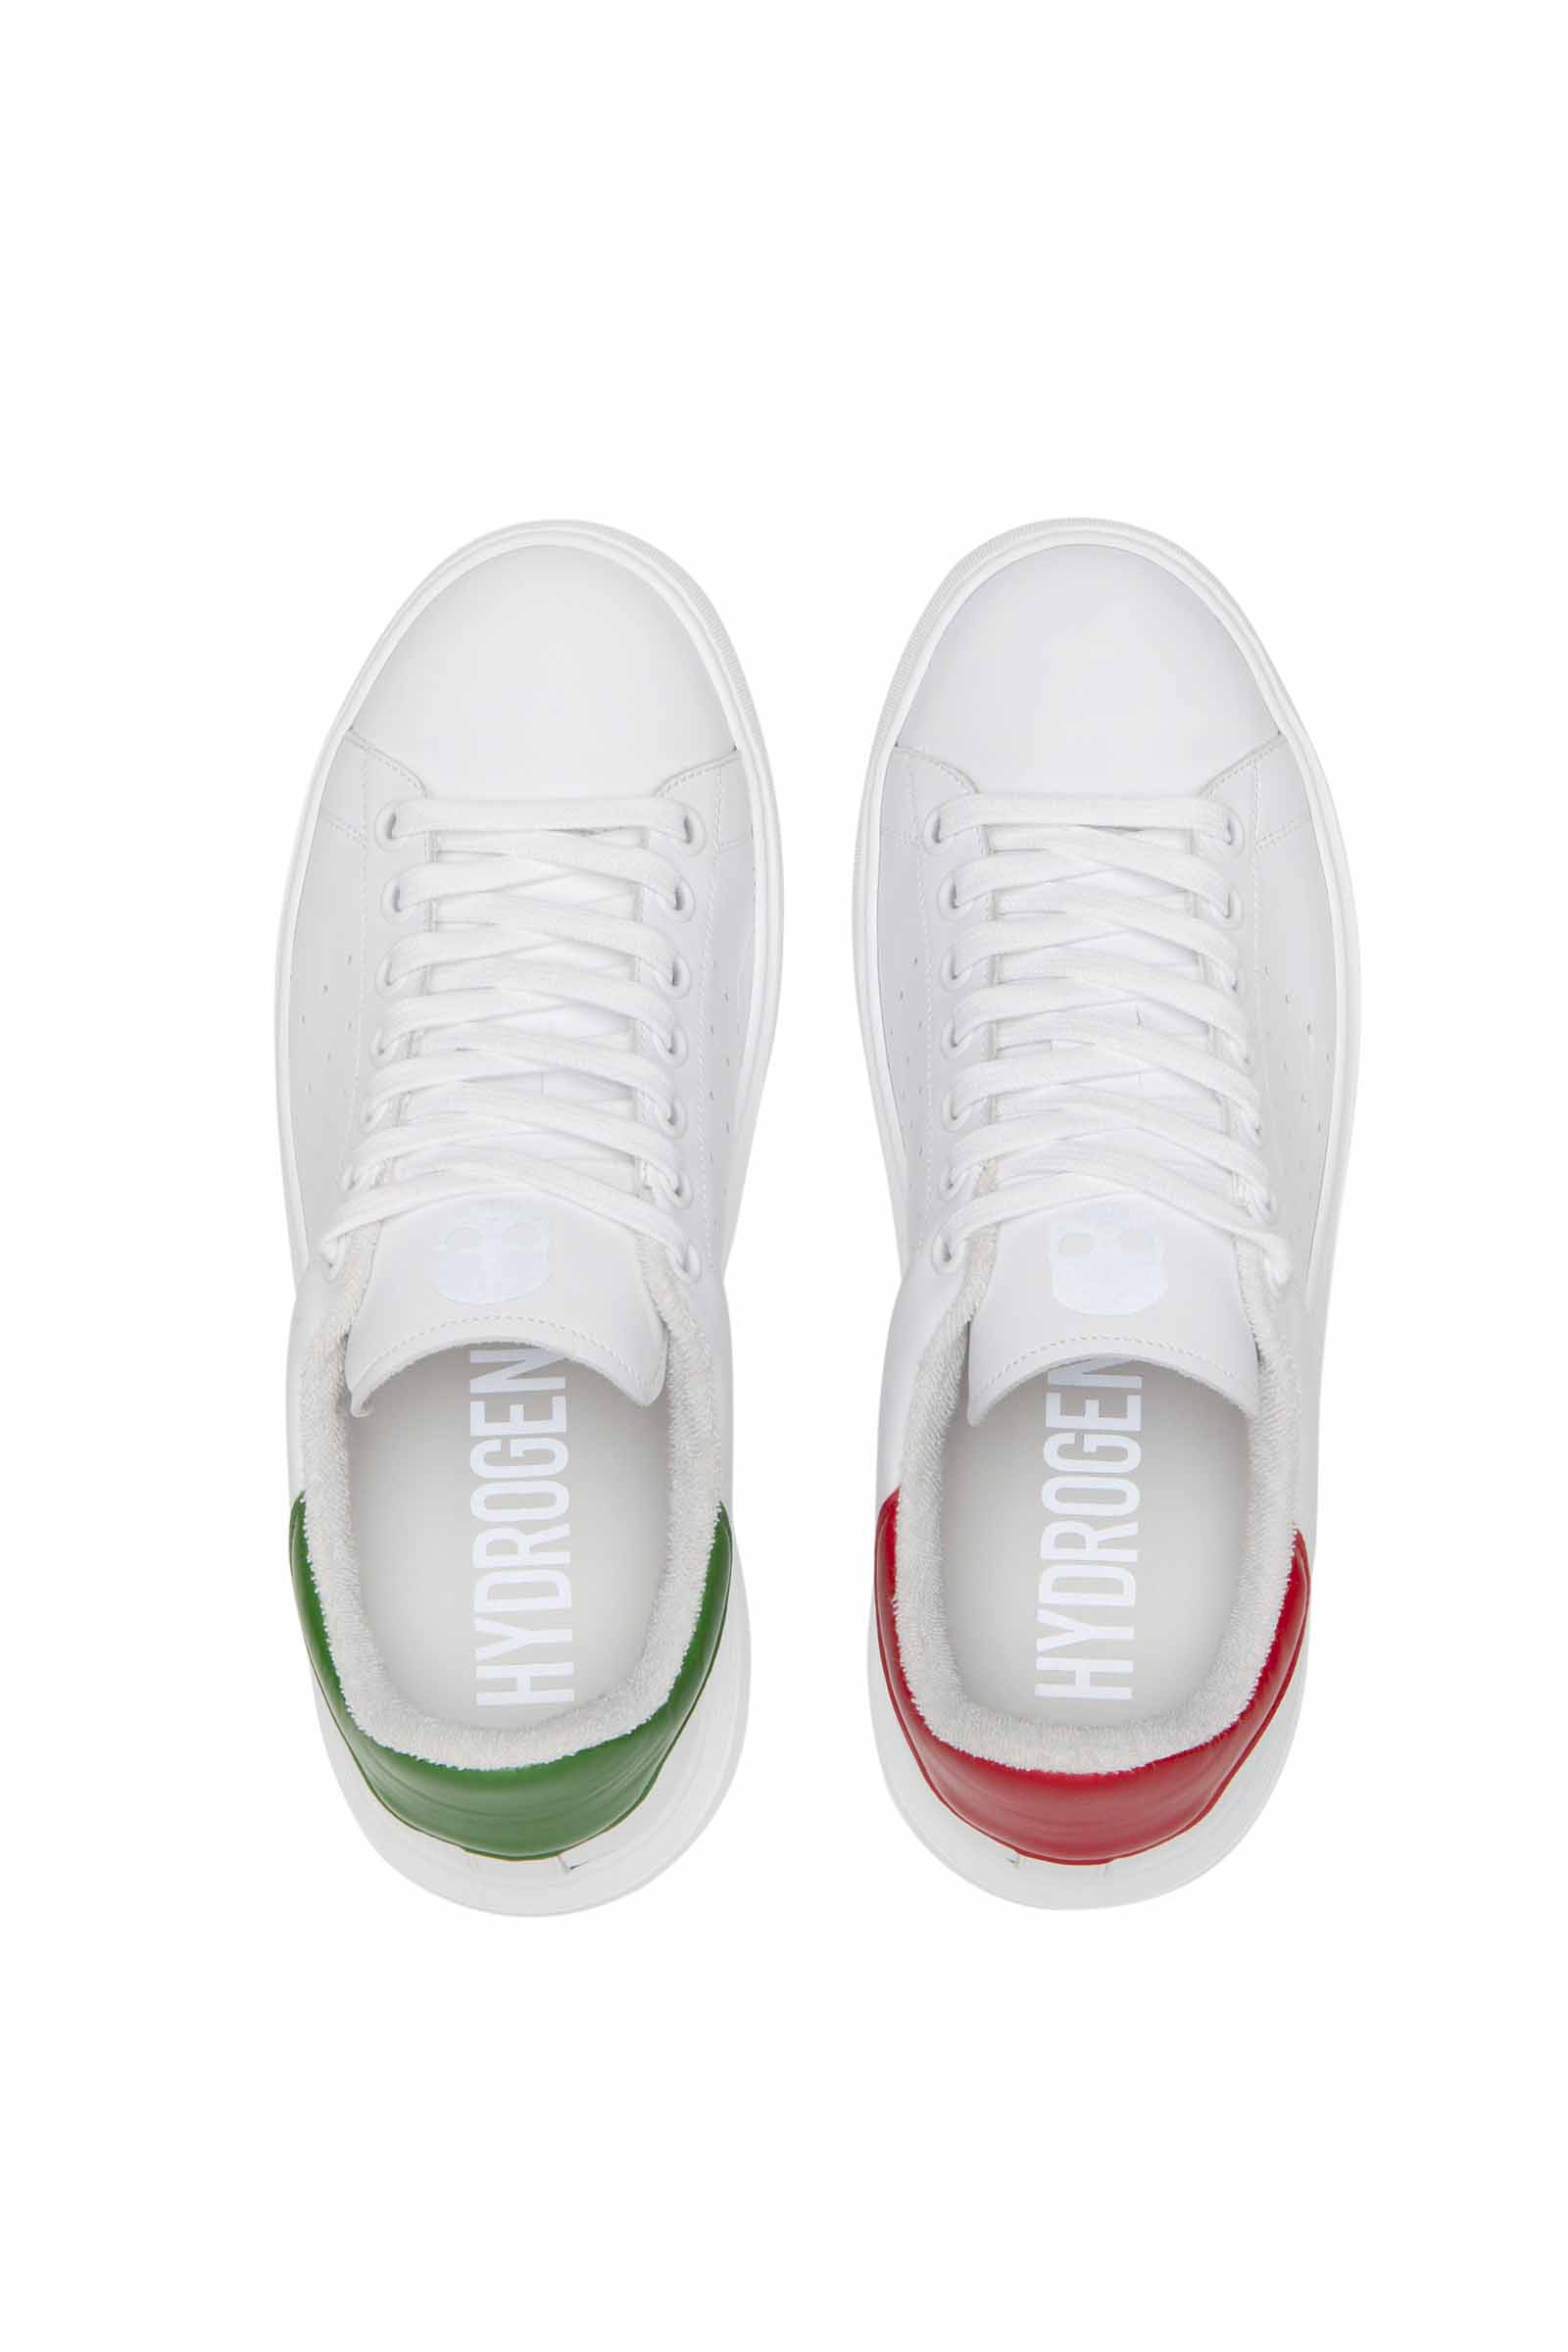 SNEAKERS ITALY LIMITED EDITION - Outlet Hydrogen - Abbigliamento sportivo